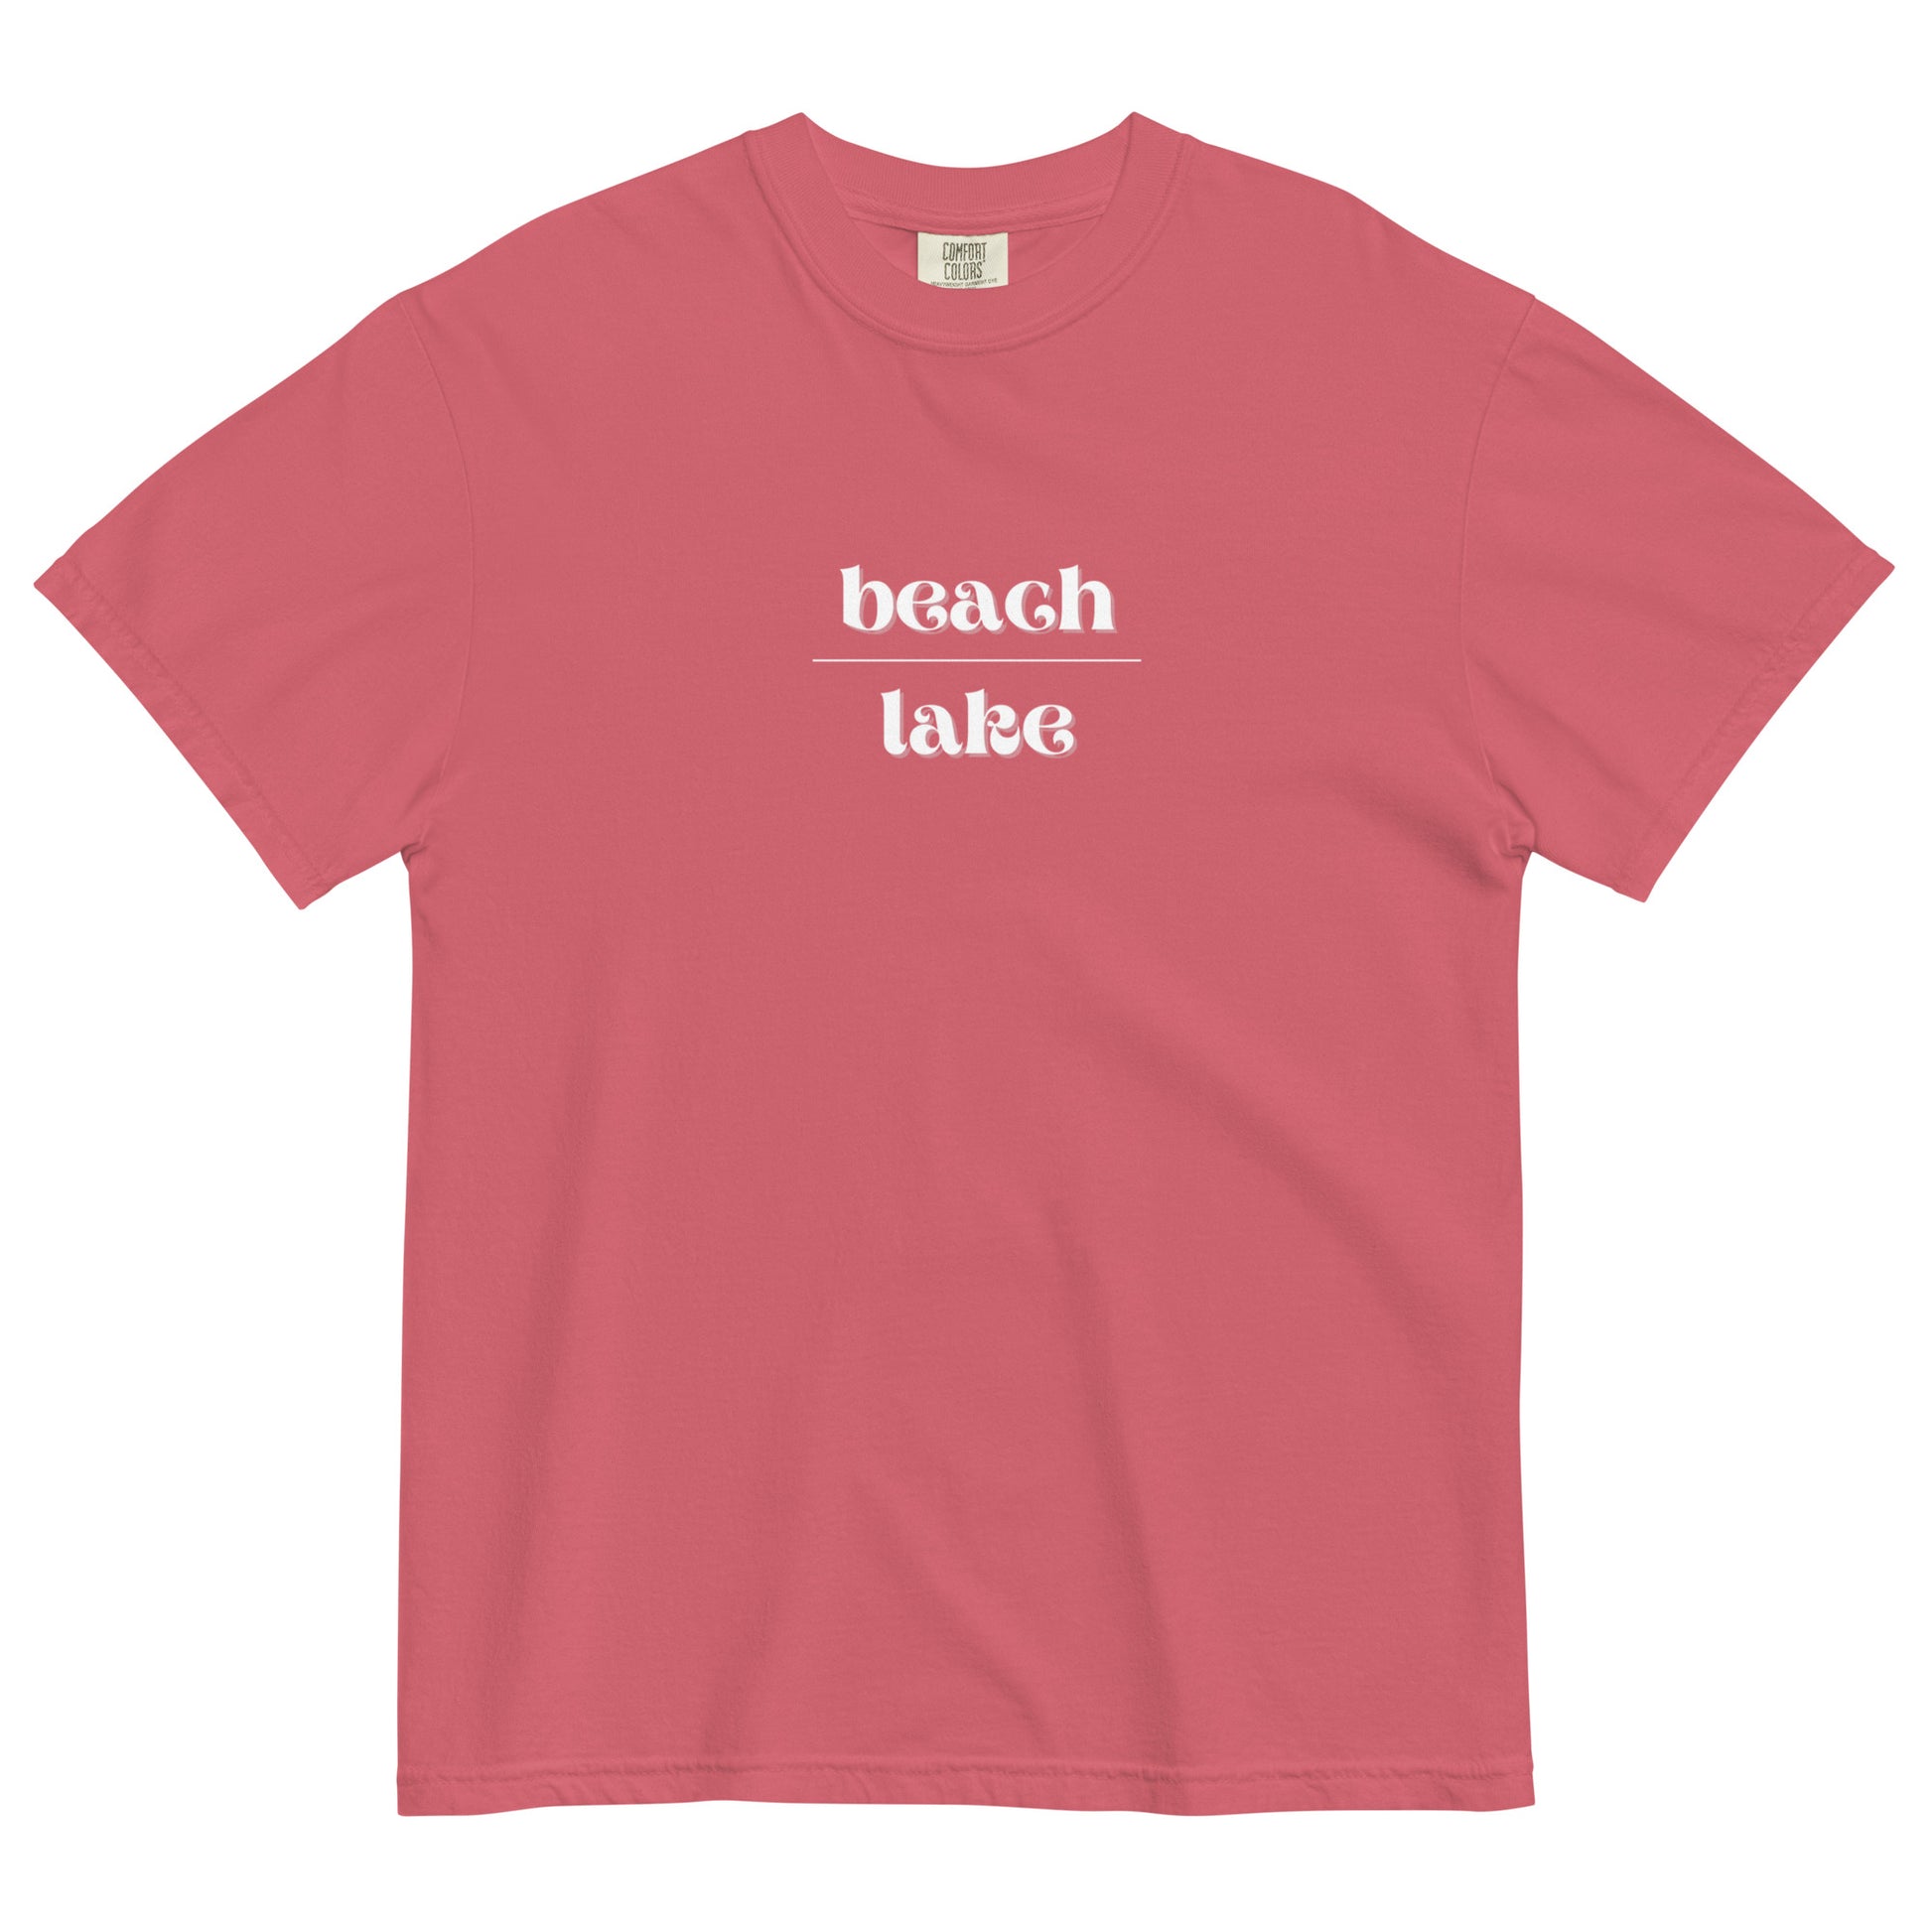 light red tshirt that says "beach over lake" in white letters